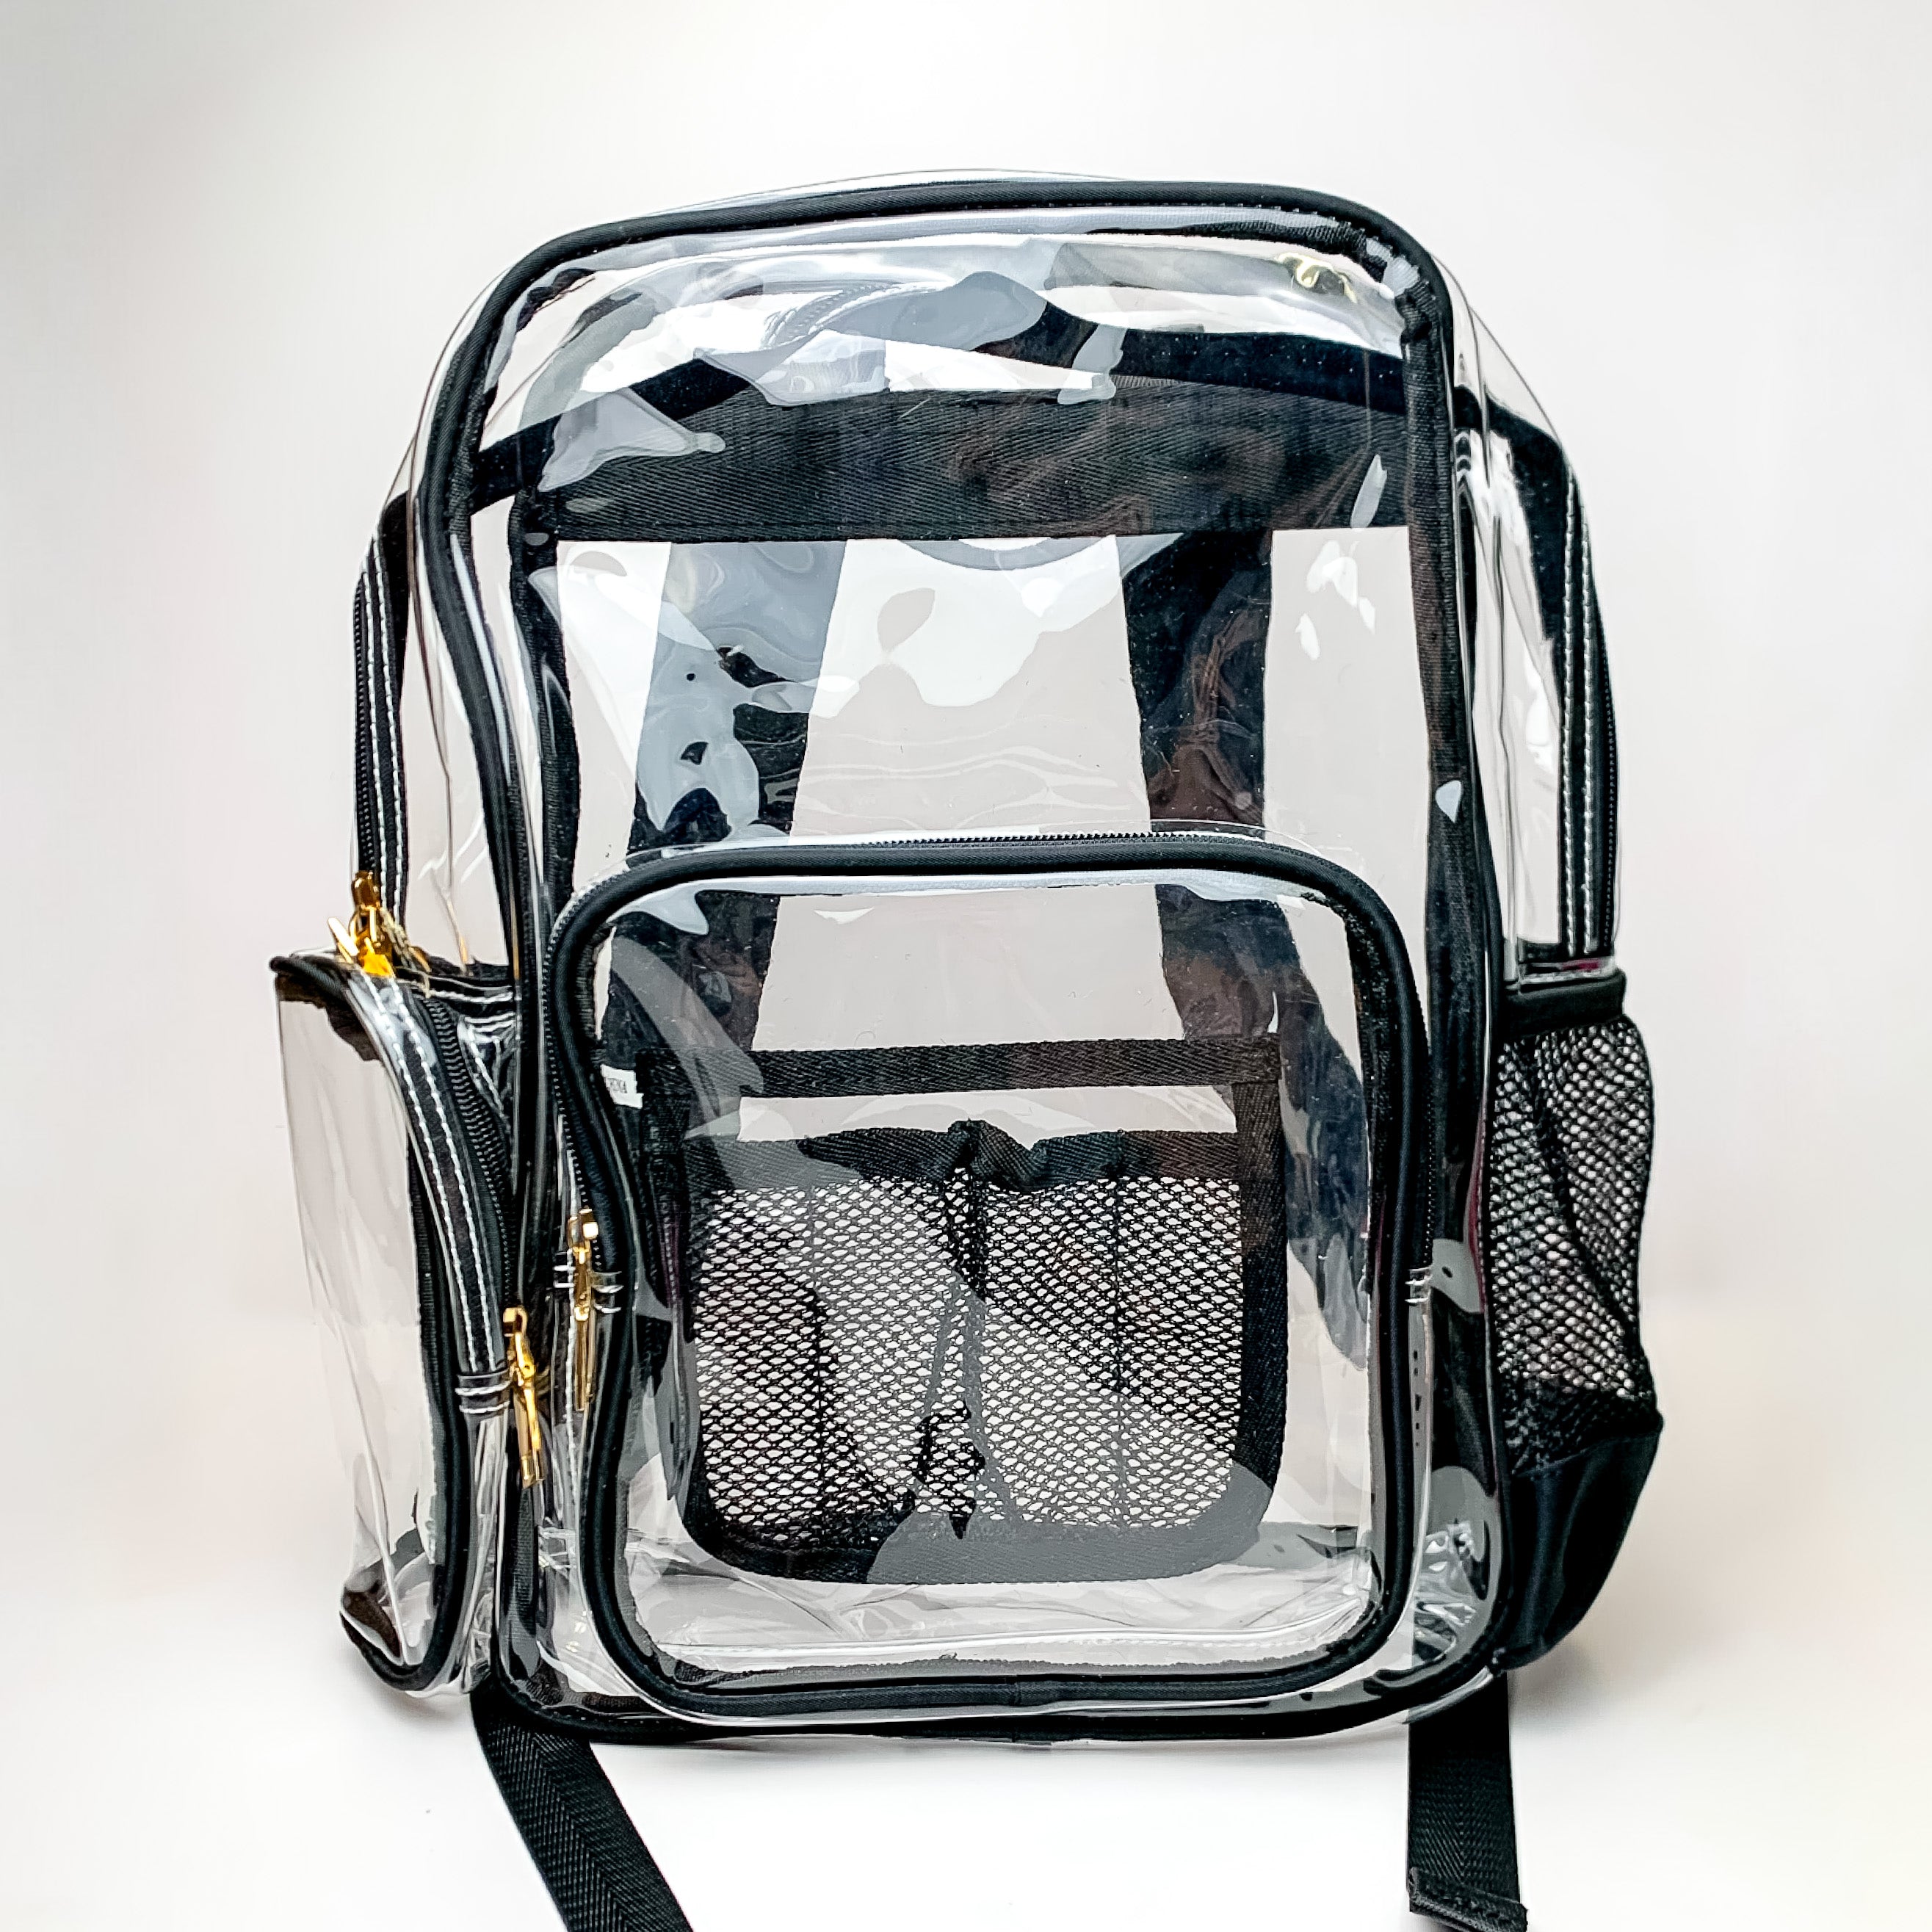 Pictured on a white background is a clear backpack with a black outline, black mesh pockets, and gold hardware. 